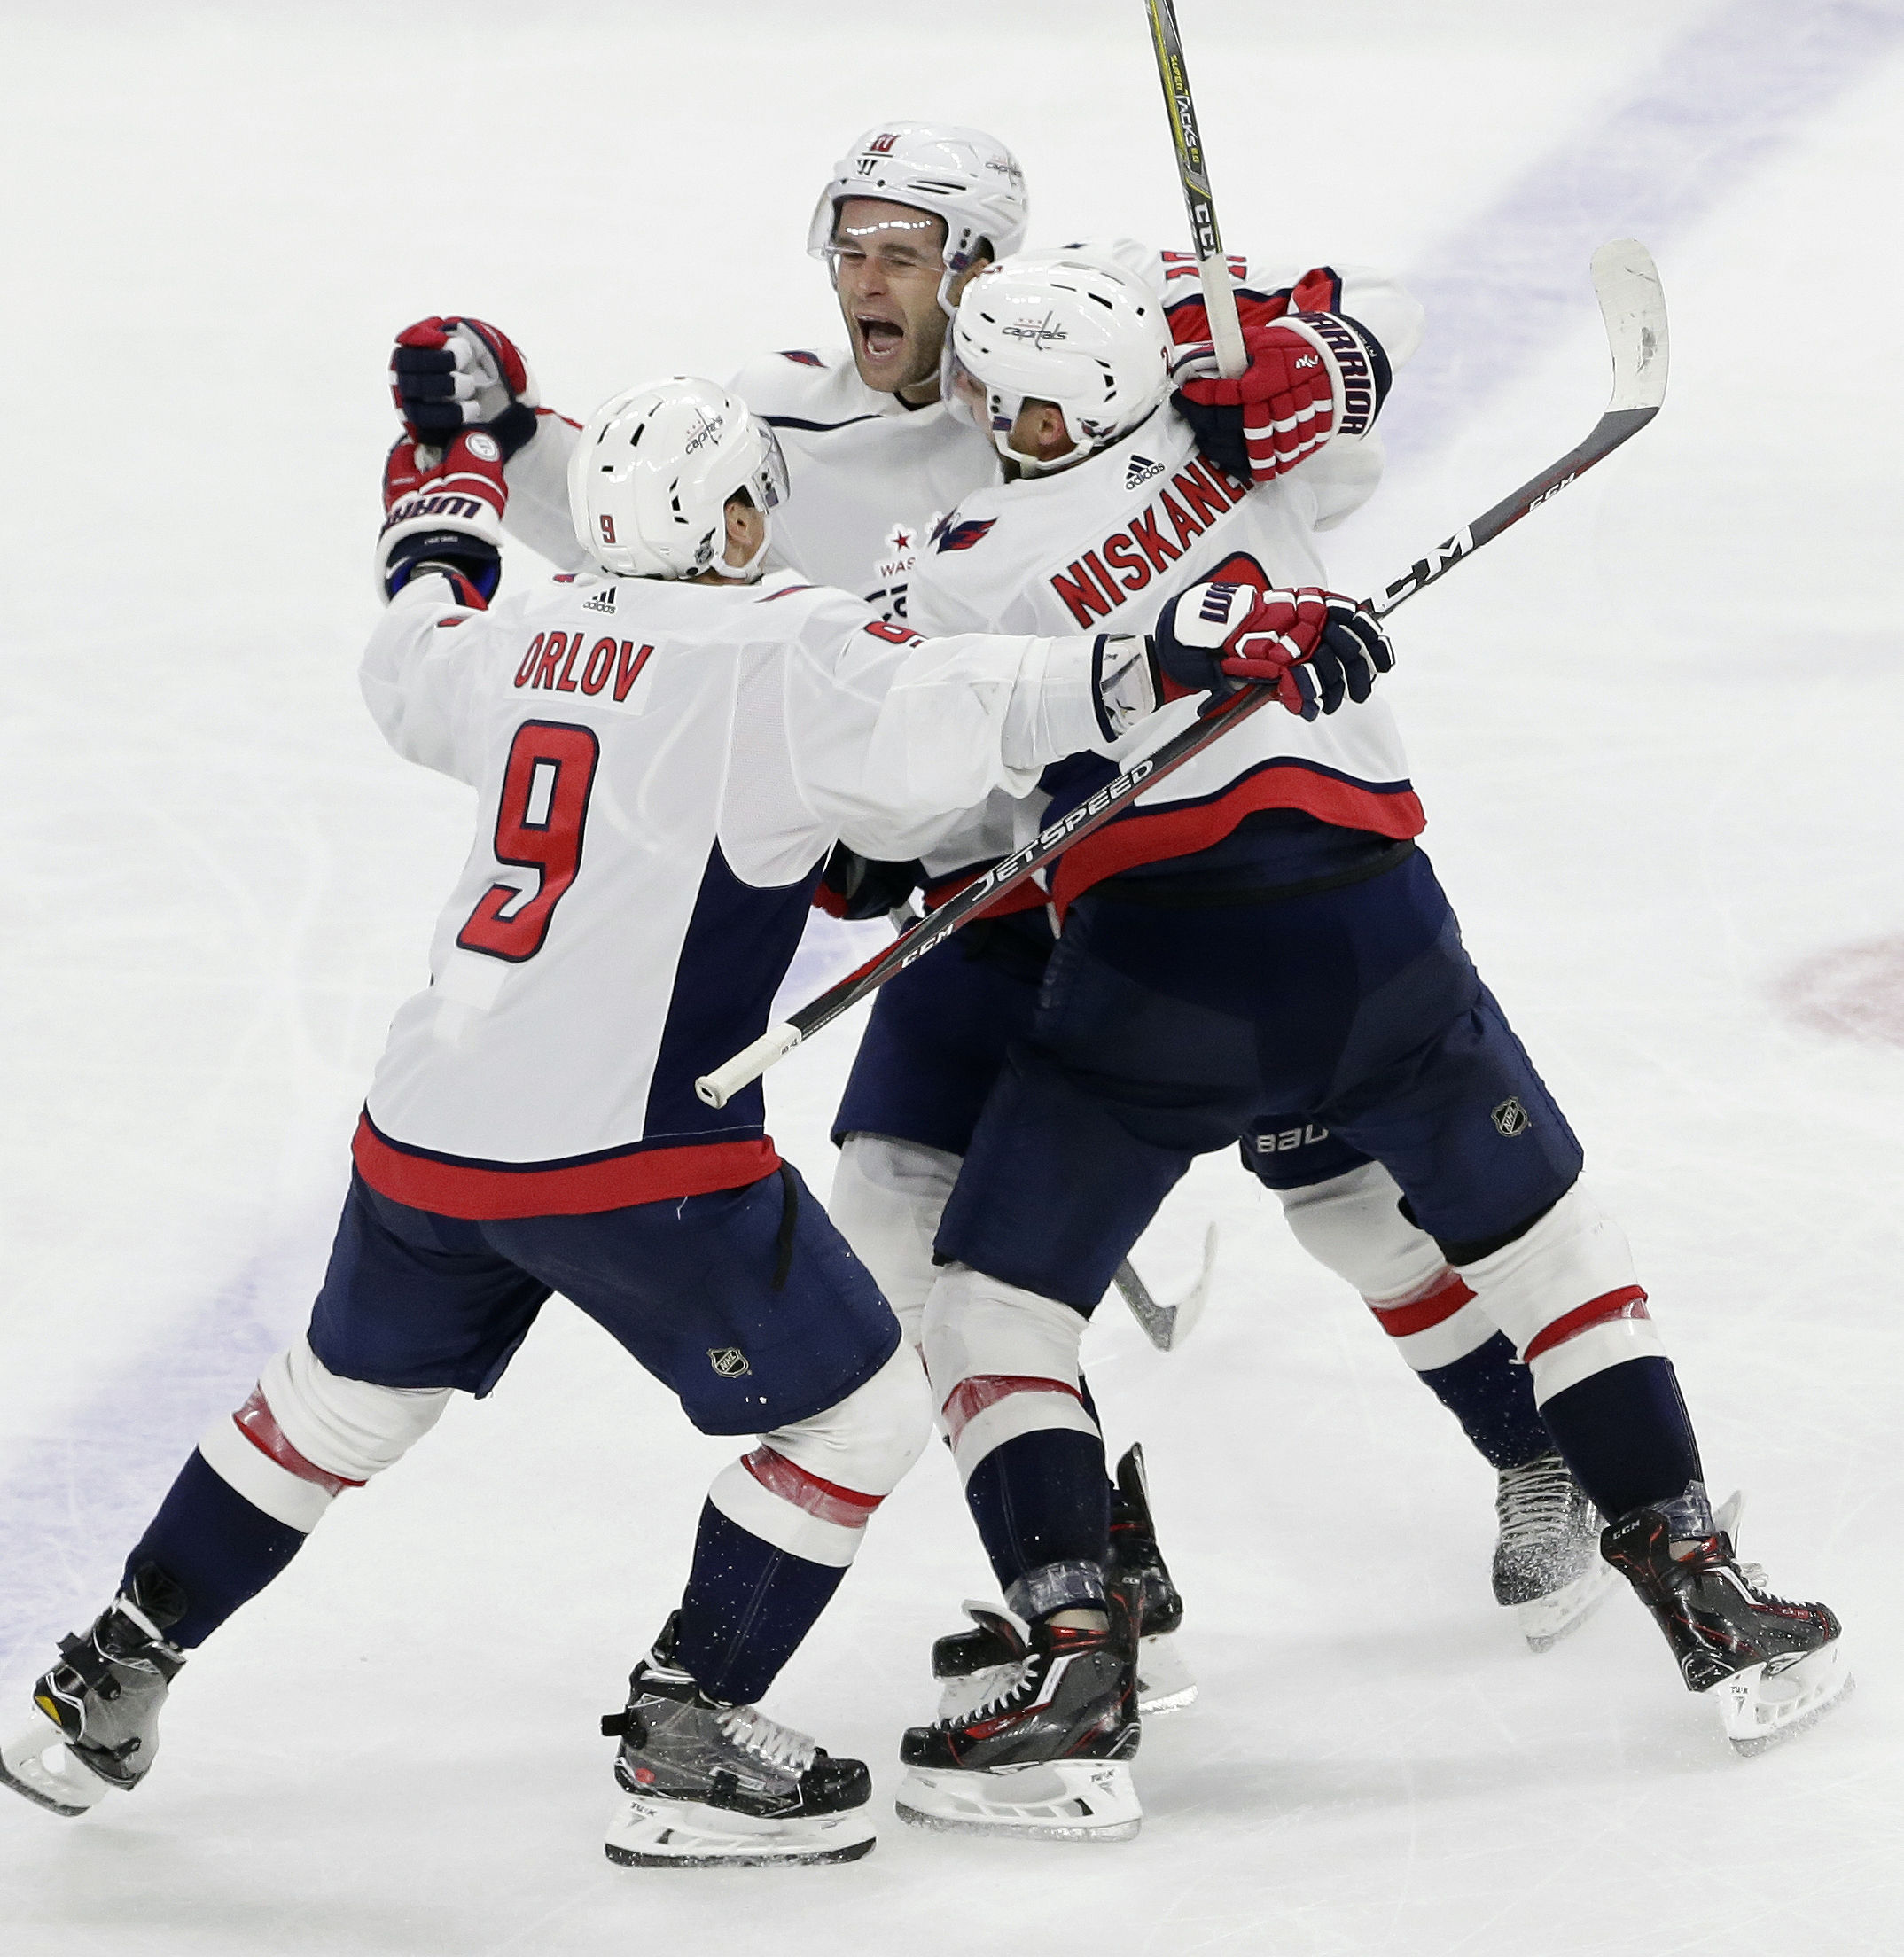 The Washington Capitals are the 2017-18 Stanley Cup Champions